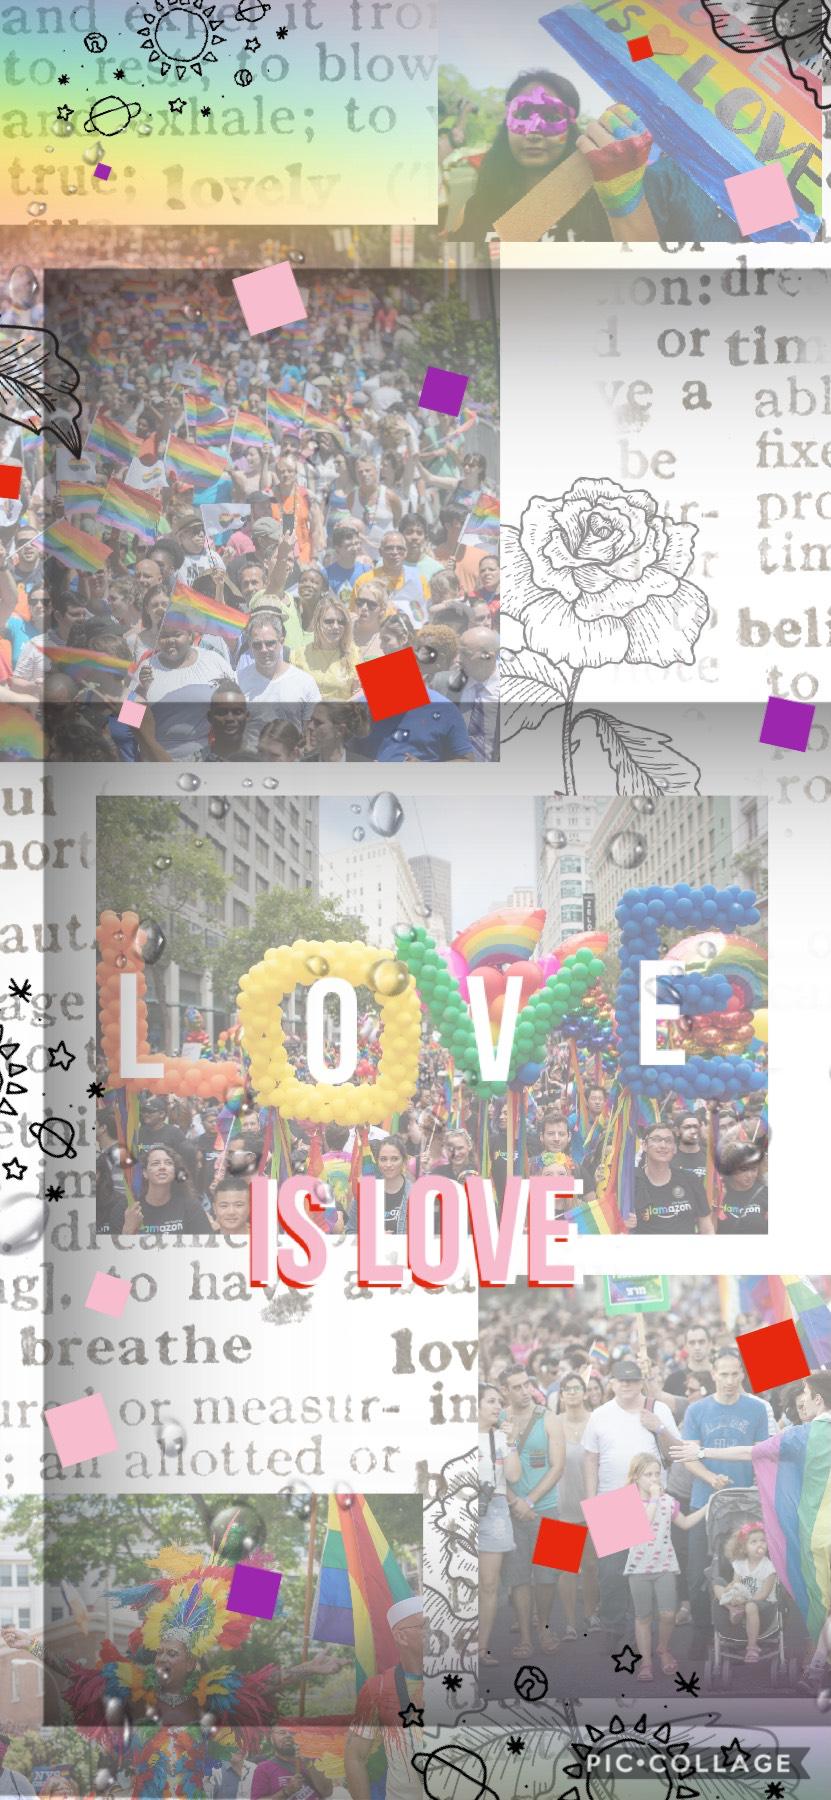 ik it’s stupid cuz I hadn’t  been on  for like the past 3 months, but frick that,  lets post some prideee...Made it a while ago for it to be my home screen during pride month, soo it’s a lot like my old style...Ima try to show some of my newer collages; t